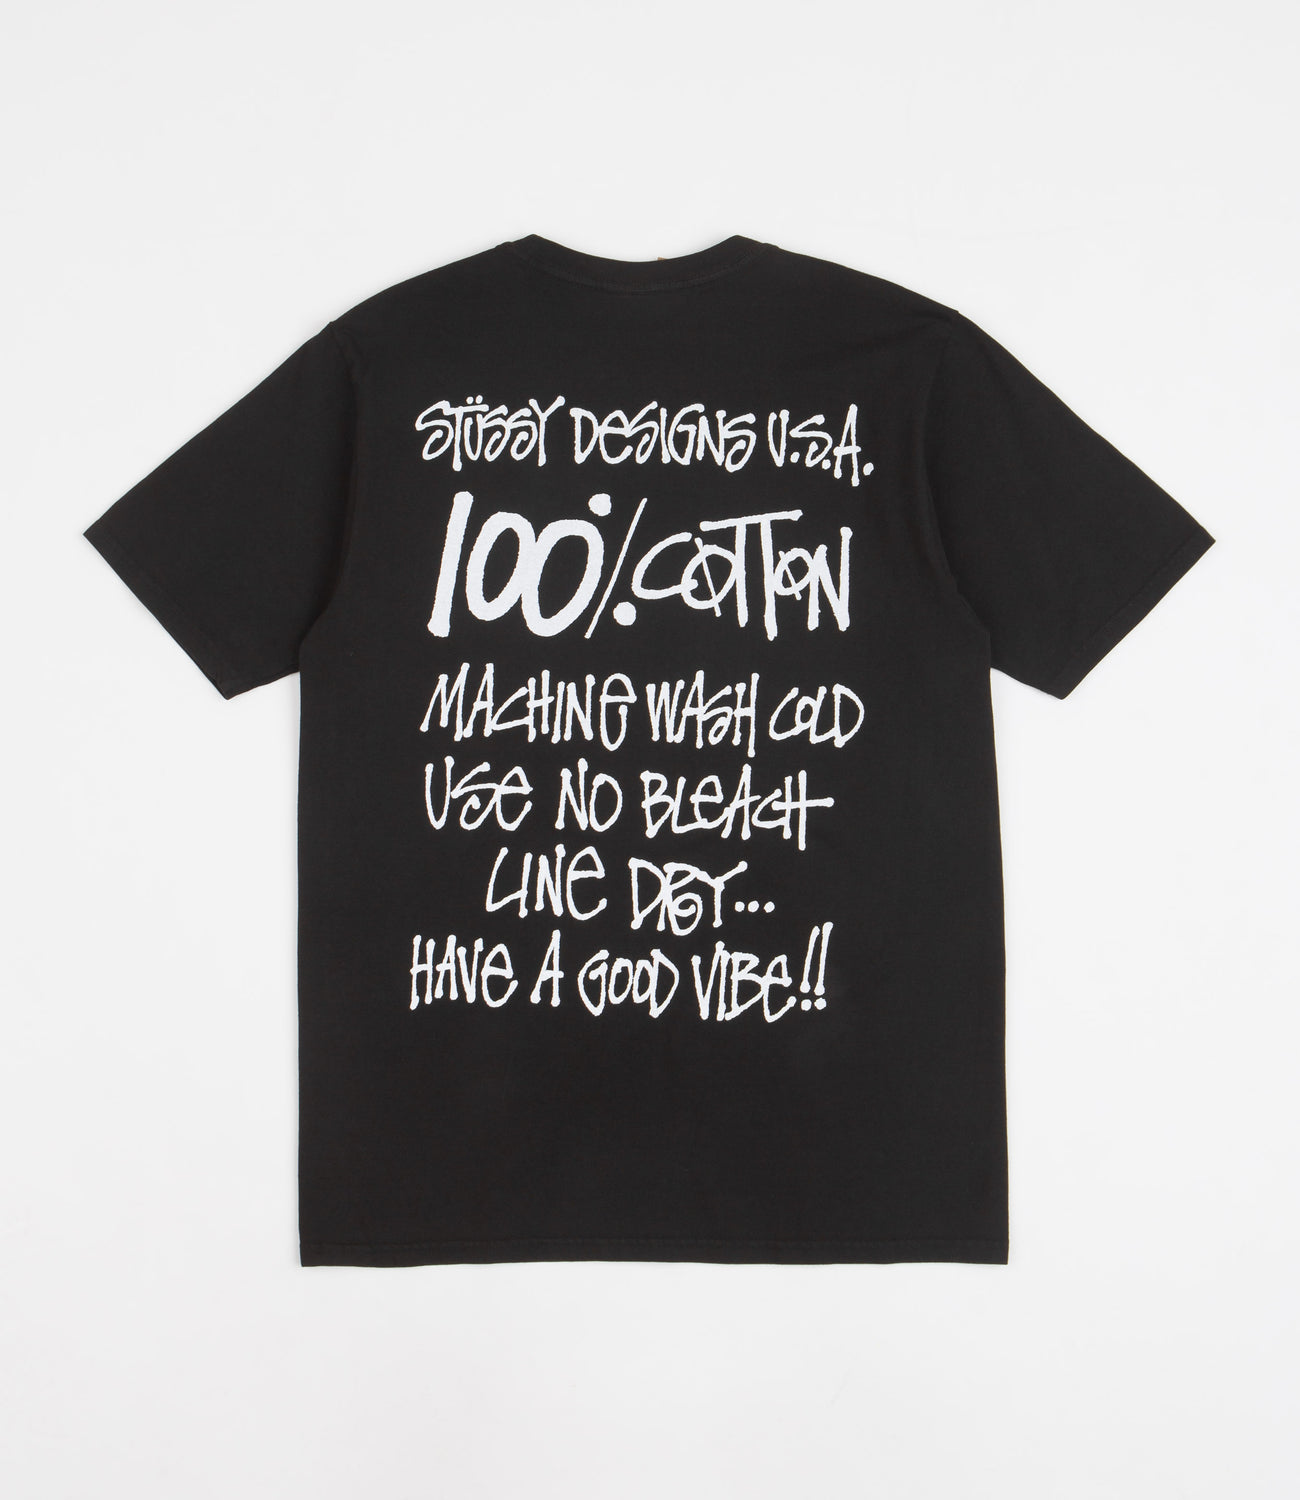 STUSSY 100% PIGMENT DYED TEE